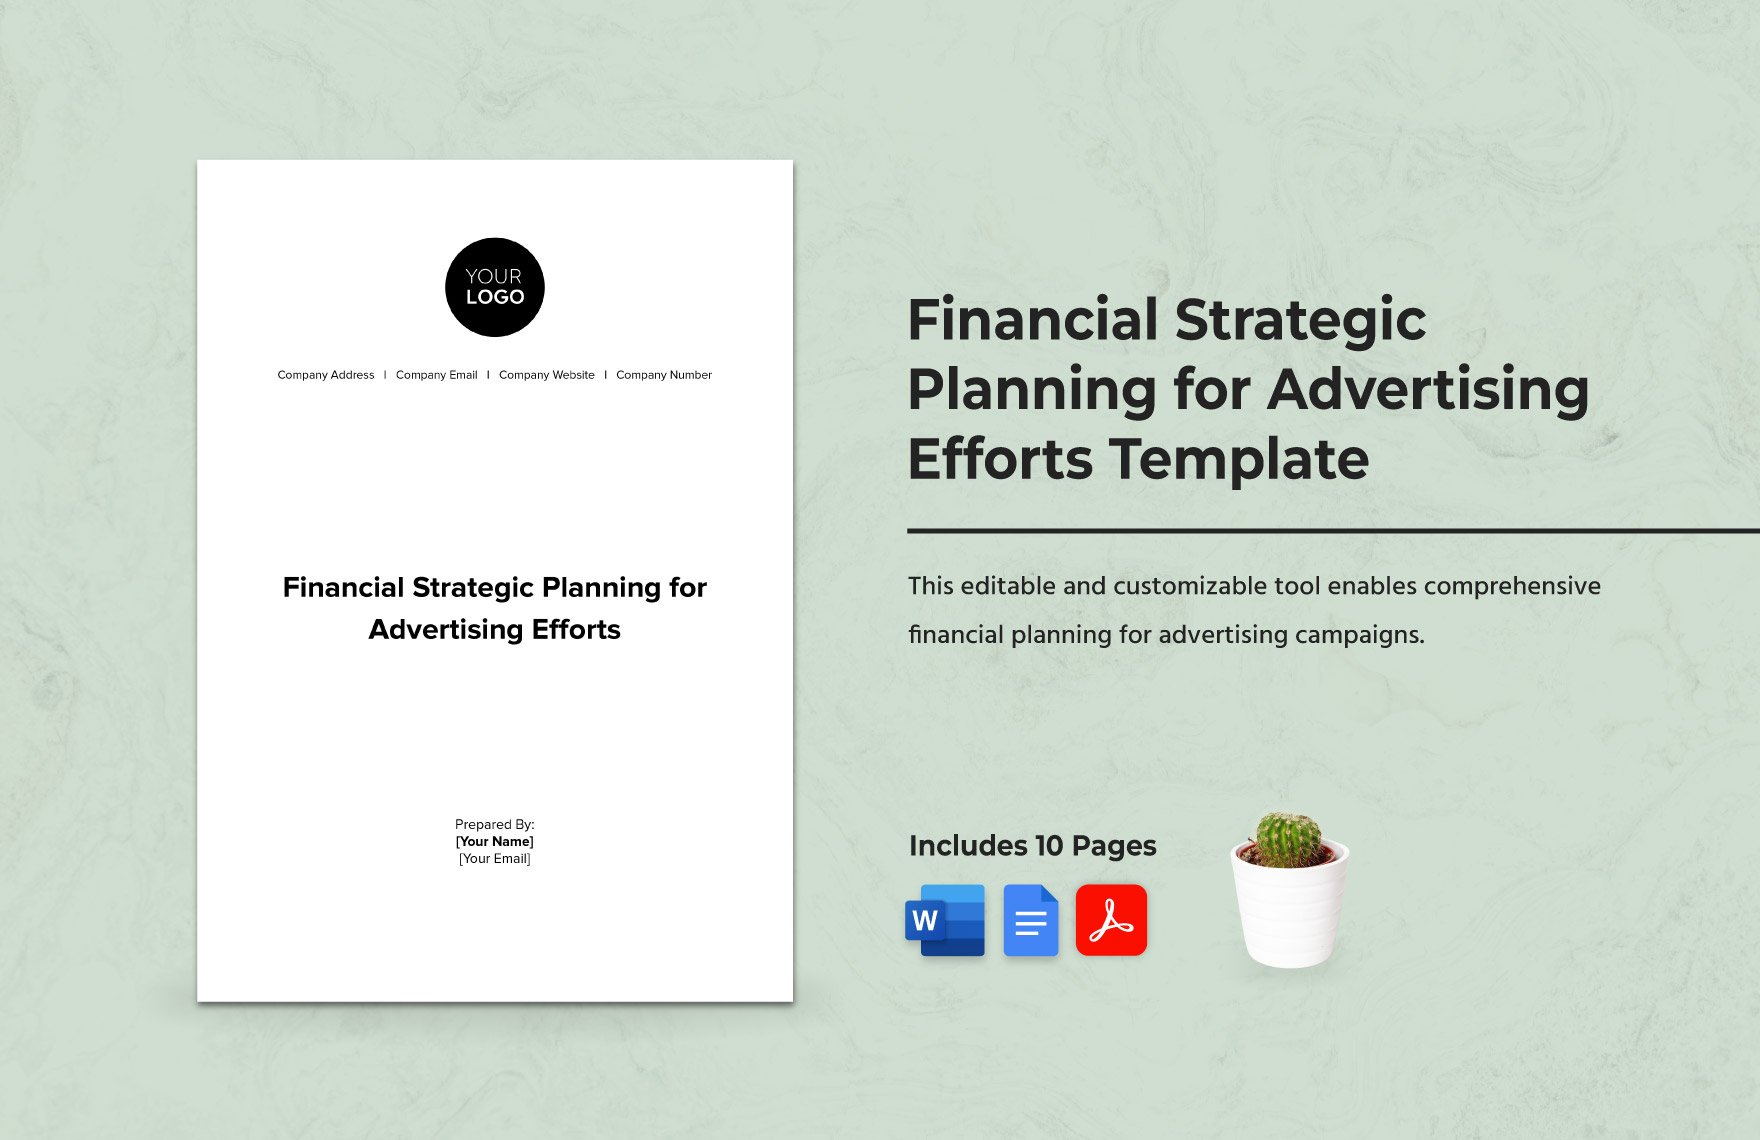 Financial Strategic Planning for Advertising Efforts Template